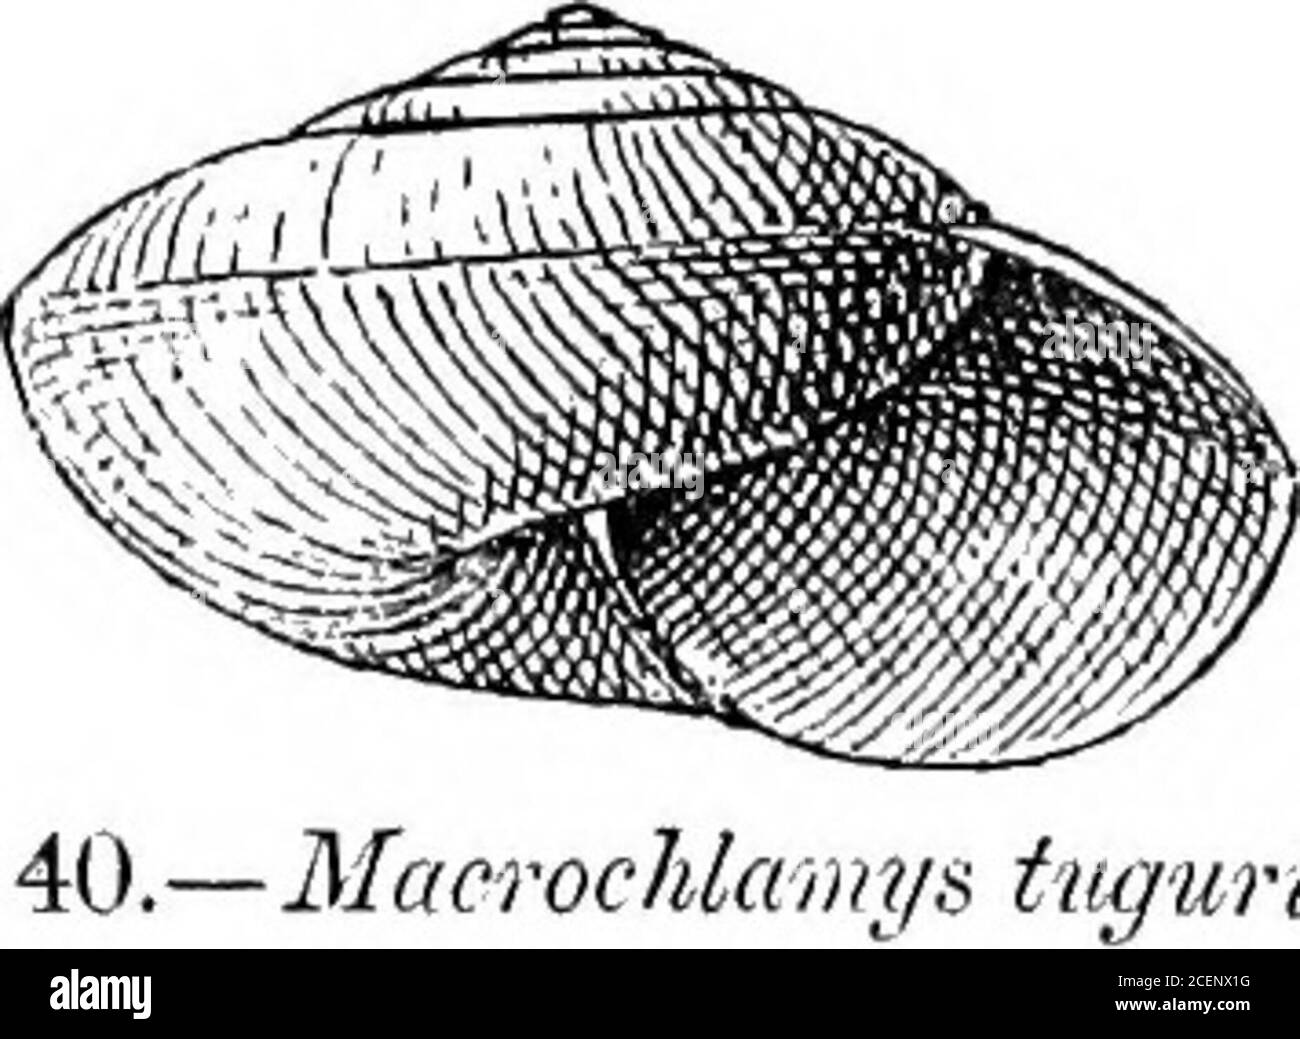 . Mollusca ... ugurium, Bs. (Helix) A. M. iV. JS. (2) x, 1852, p. 348; Pfr. (Helix) Mon. Hel. iii, 1853, p. 636; id. t. c. iv,1859, p. 124; H. 8f T. (flelix) C. I. 1876, pi. 29, fig. 10; Nev.(Nanina) Hand-l. i, 1878, p. 80; Oodivin-Austen (Macroclilamys),J. A. S. B. 1882, 2, p. 69, pi. 5, fig. 4; id. (Macrochlamys) Mol.Ind. i, 1883, pi. 19, fig. 2 (shell and animal), pi. 20, fig. 3 (details) ;id. t. e. ii, 1907, p. 151, pi. 104, figs. 1-7. Shell perforate, depressedly conoid, sublenticular, thin, fulvoushorny, dull and closely striated above and more distantly rugate,decussated with very fine Stock Photo